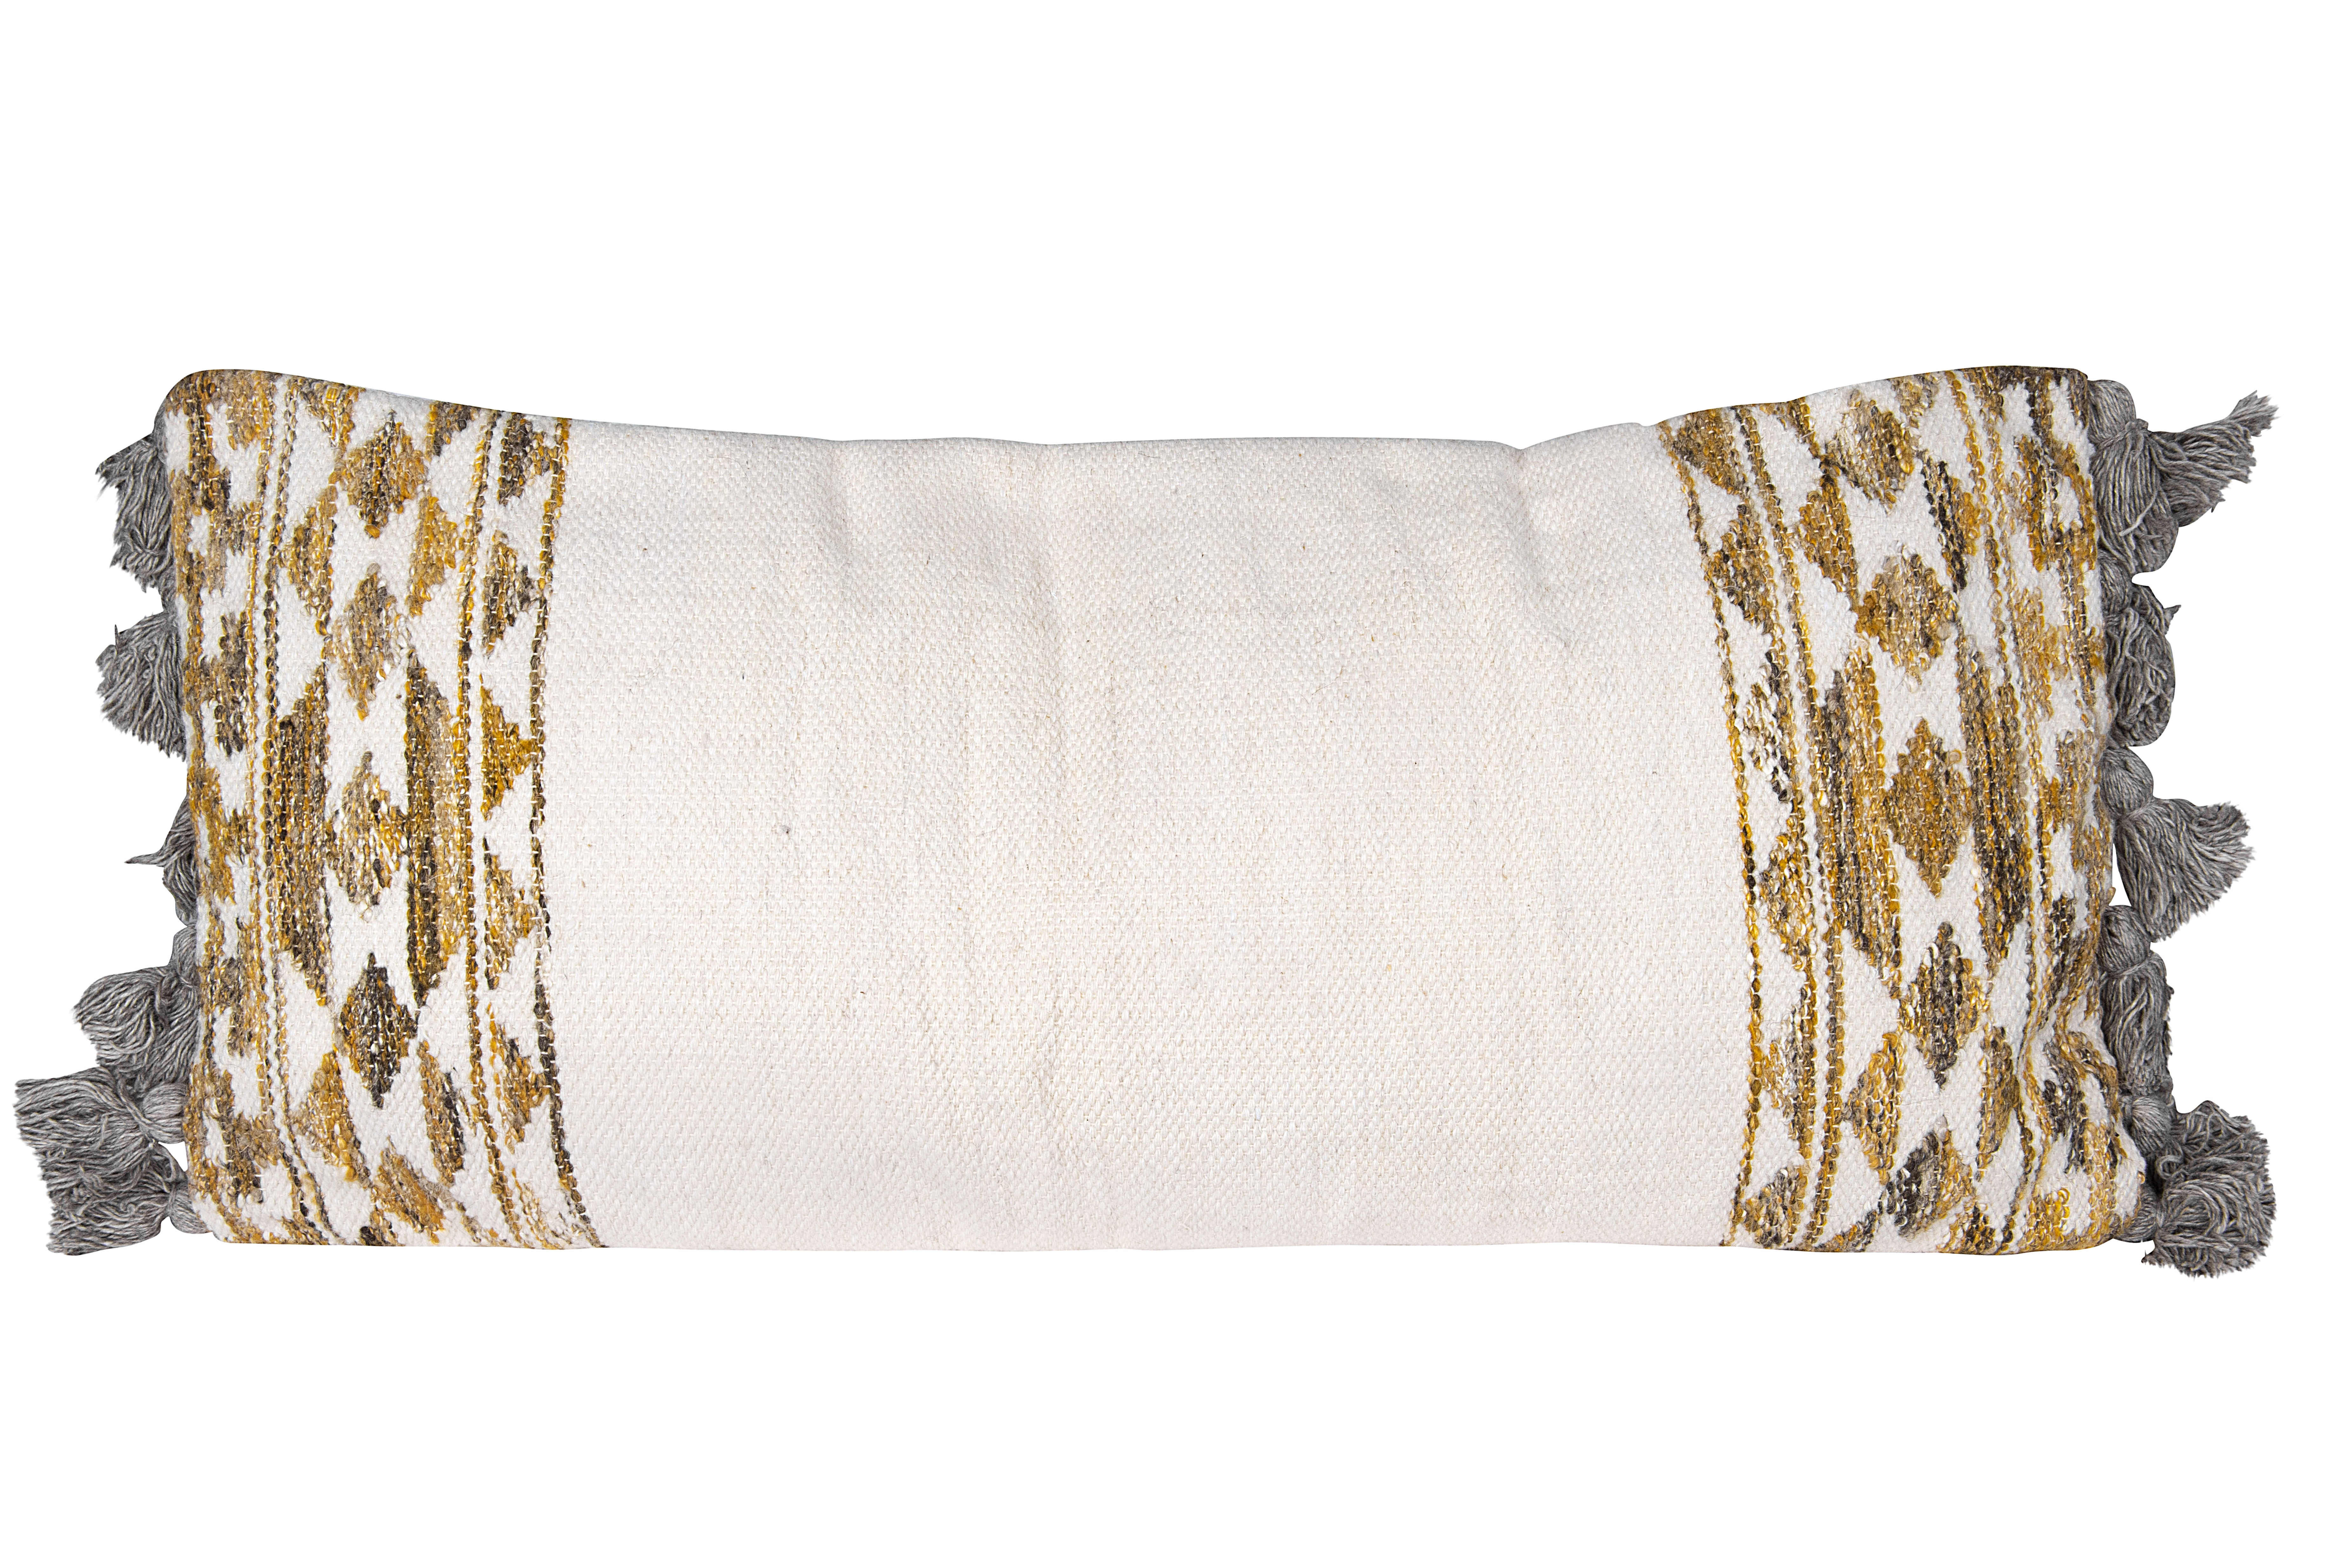 Rectangle White, Brown & Grey Handwoven Wool Kilim Pillow with Grey Tassels - Nomad Home